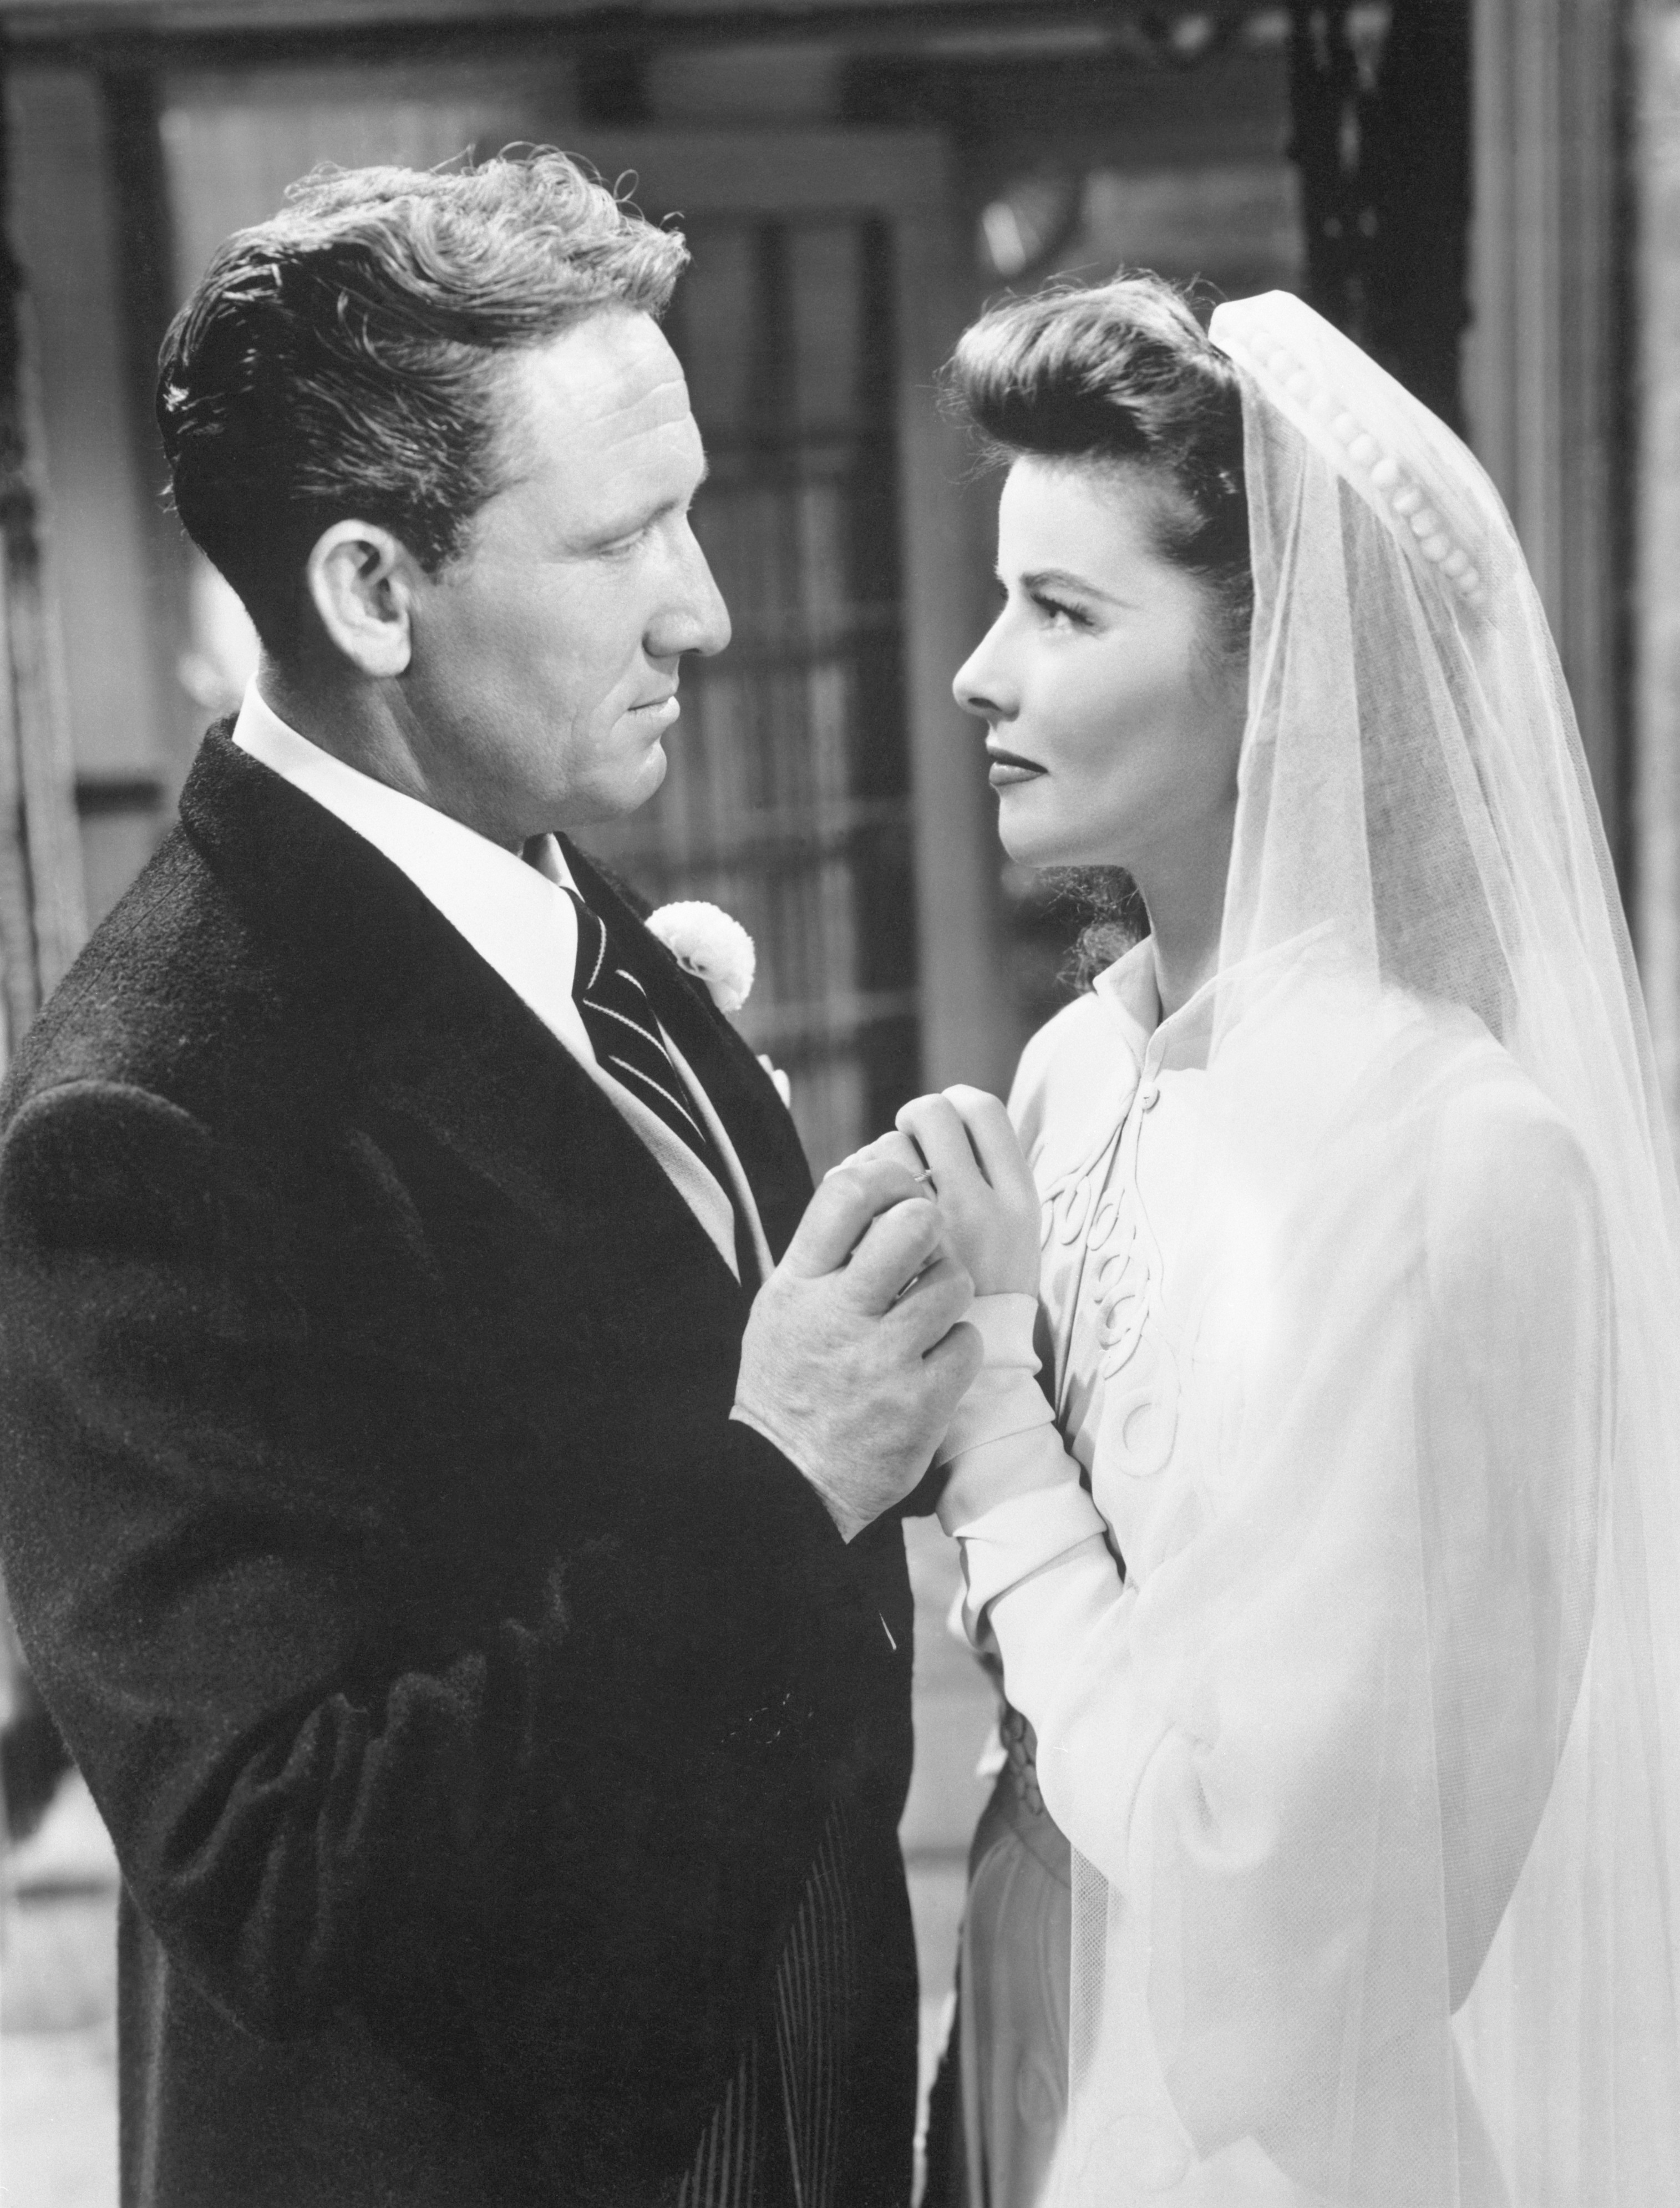 Katharine Hepburn and Spencer Tracy in "Woman of the Year," in 1942